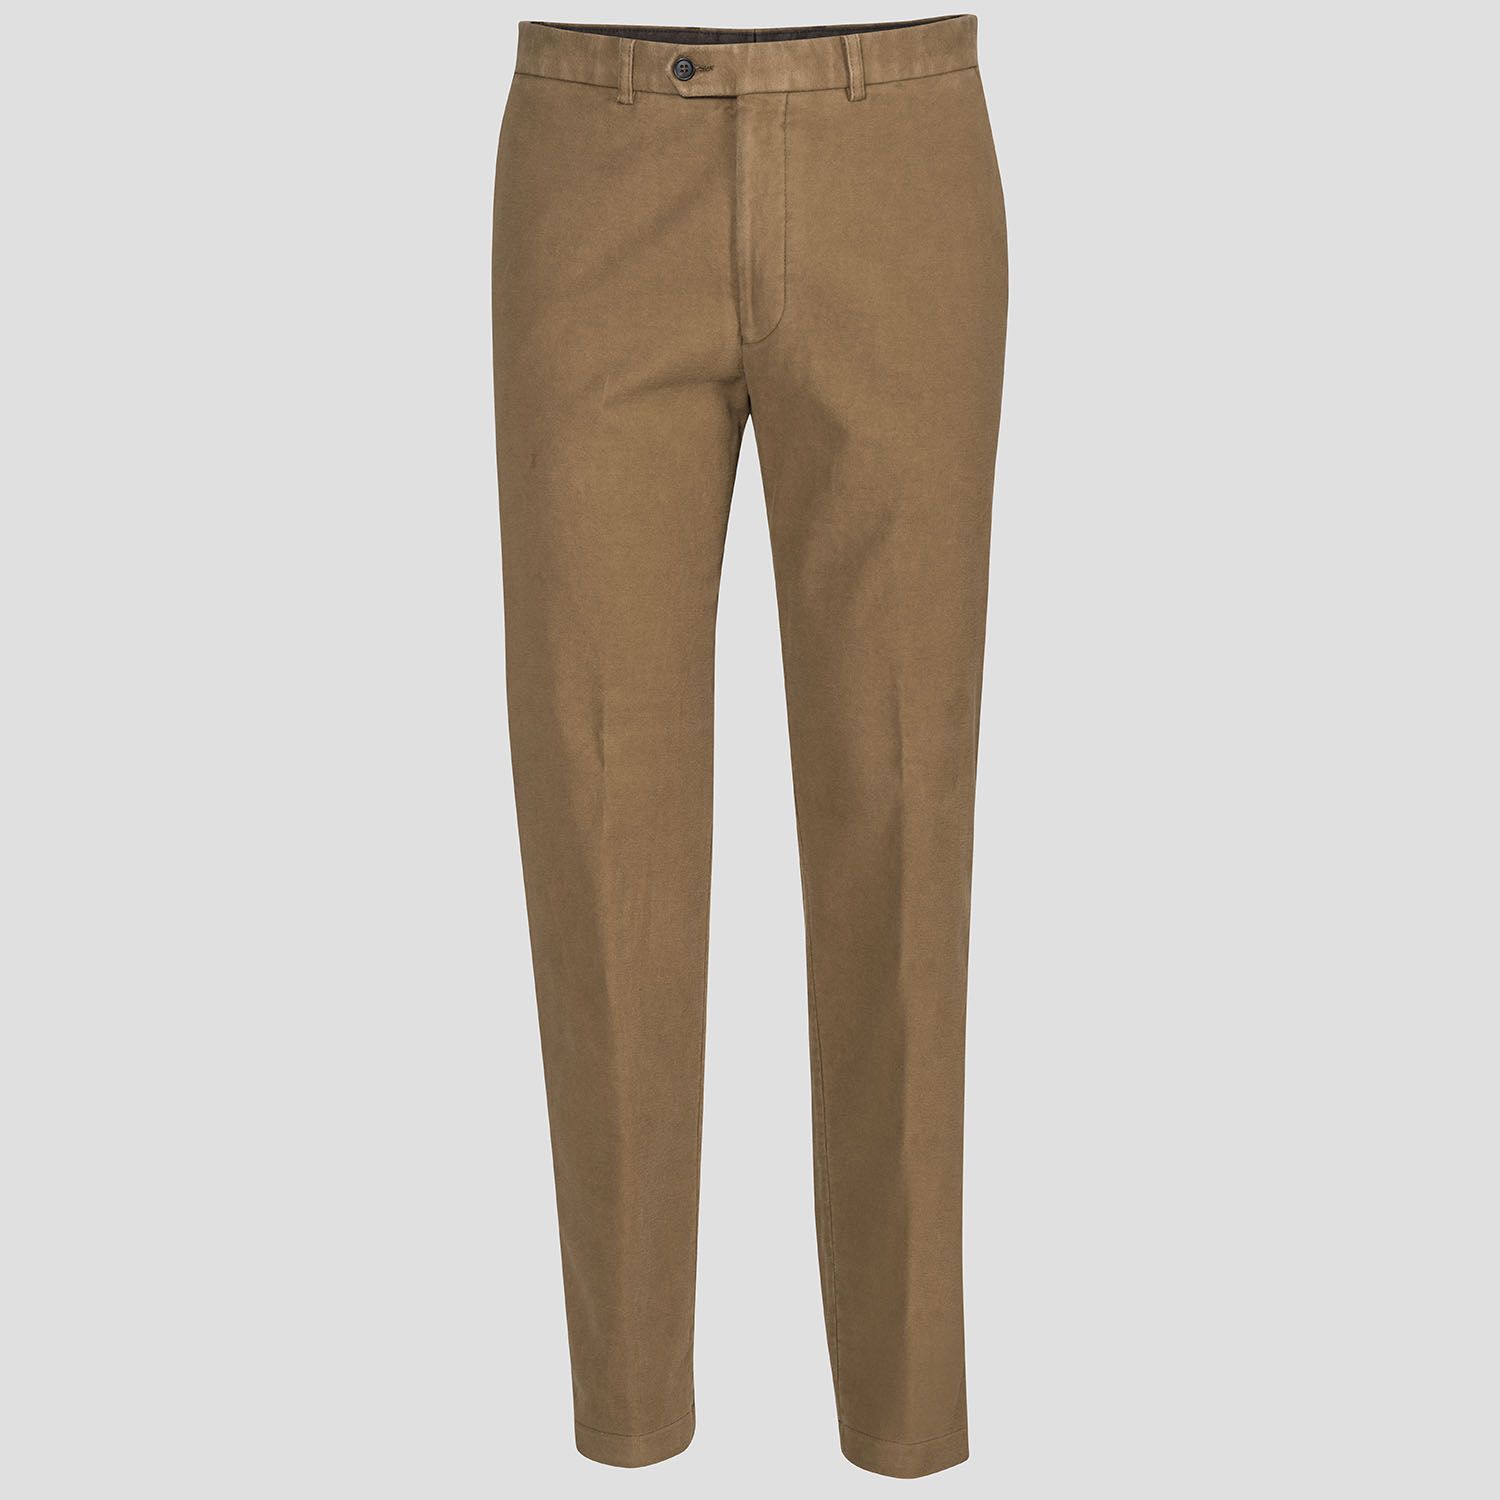 Moleskin Trousers  Navy  Oliver Brown